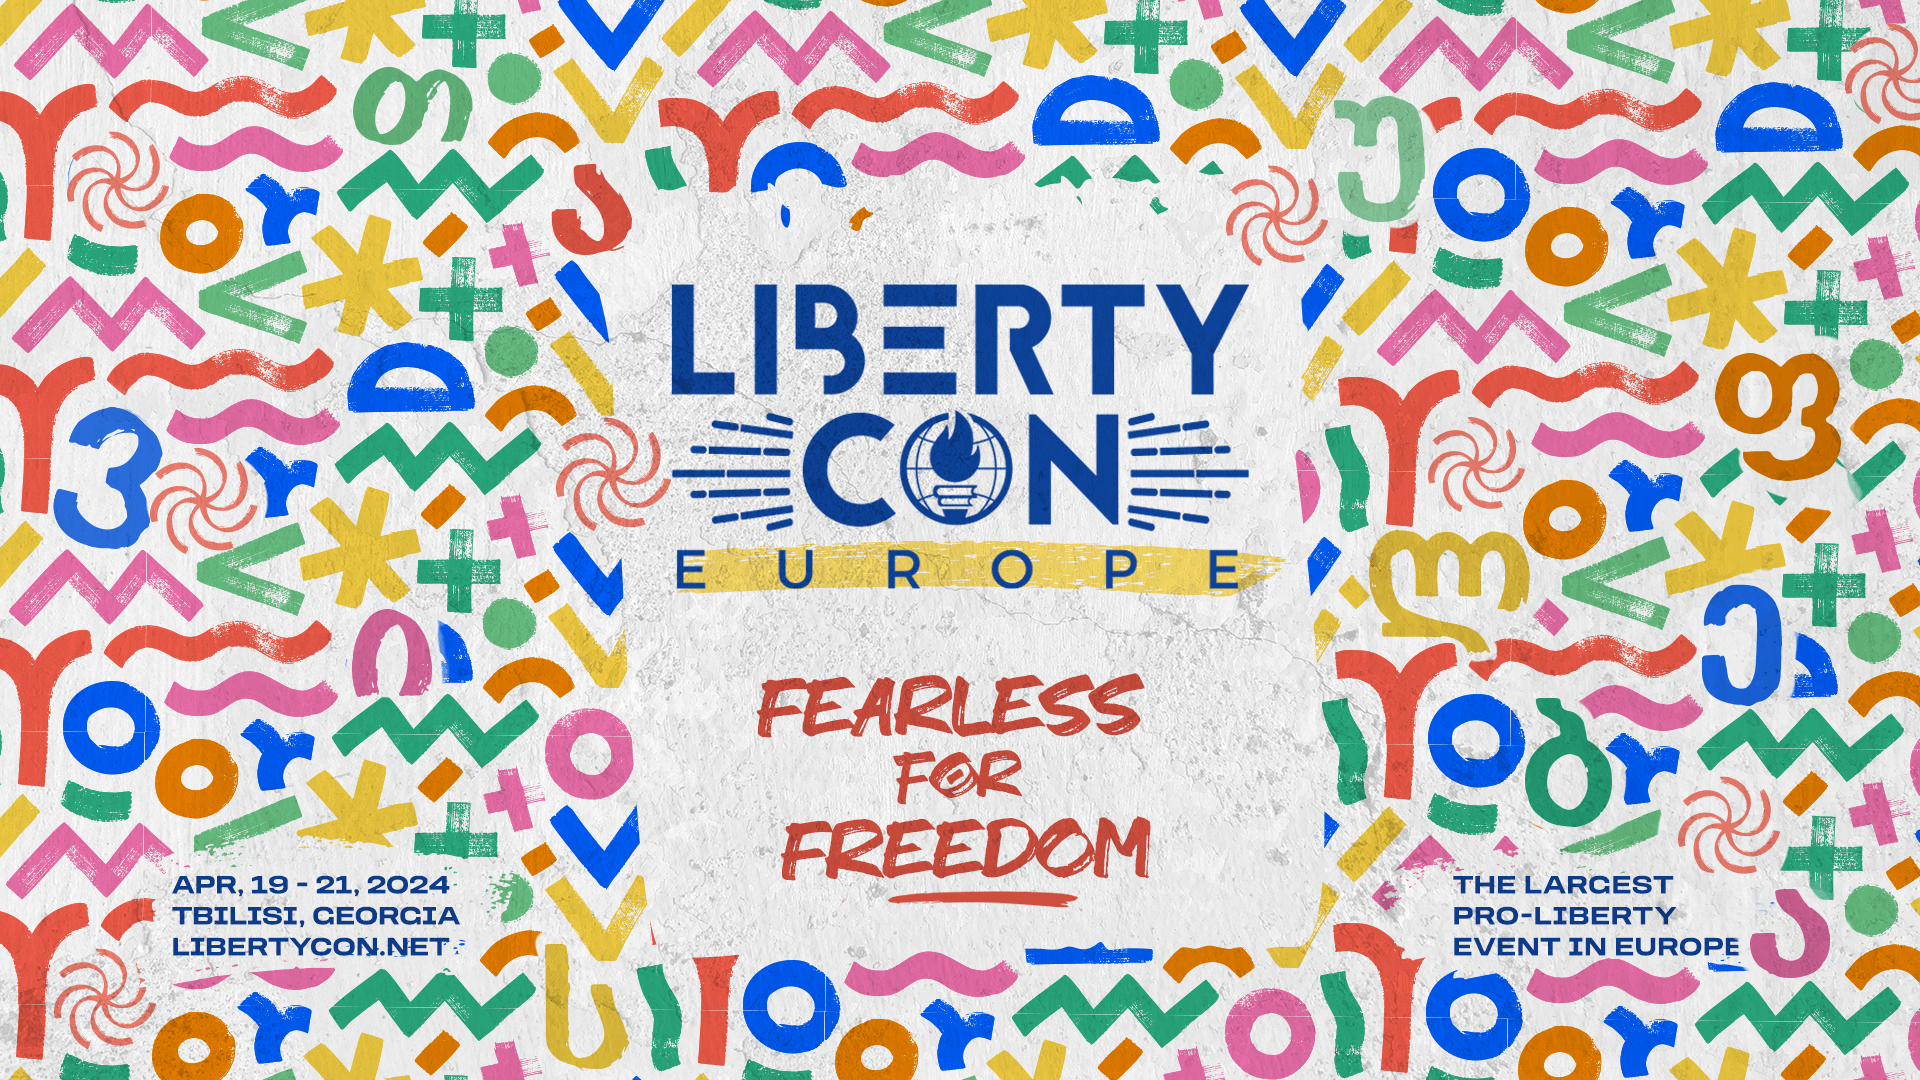 In Tbilisi, Georgia, a gathering unlike any other is fast approaching! LibertyCon Europe 2024 is gearing up to be an unmissable experience!